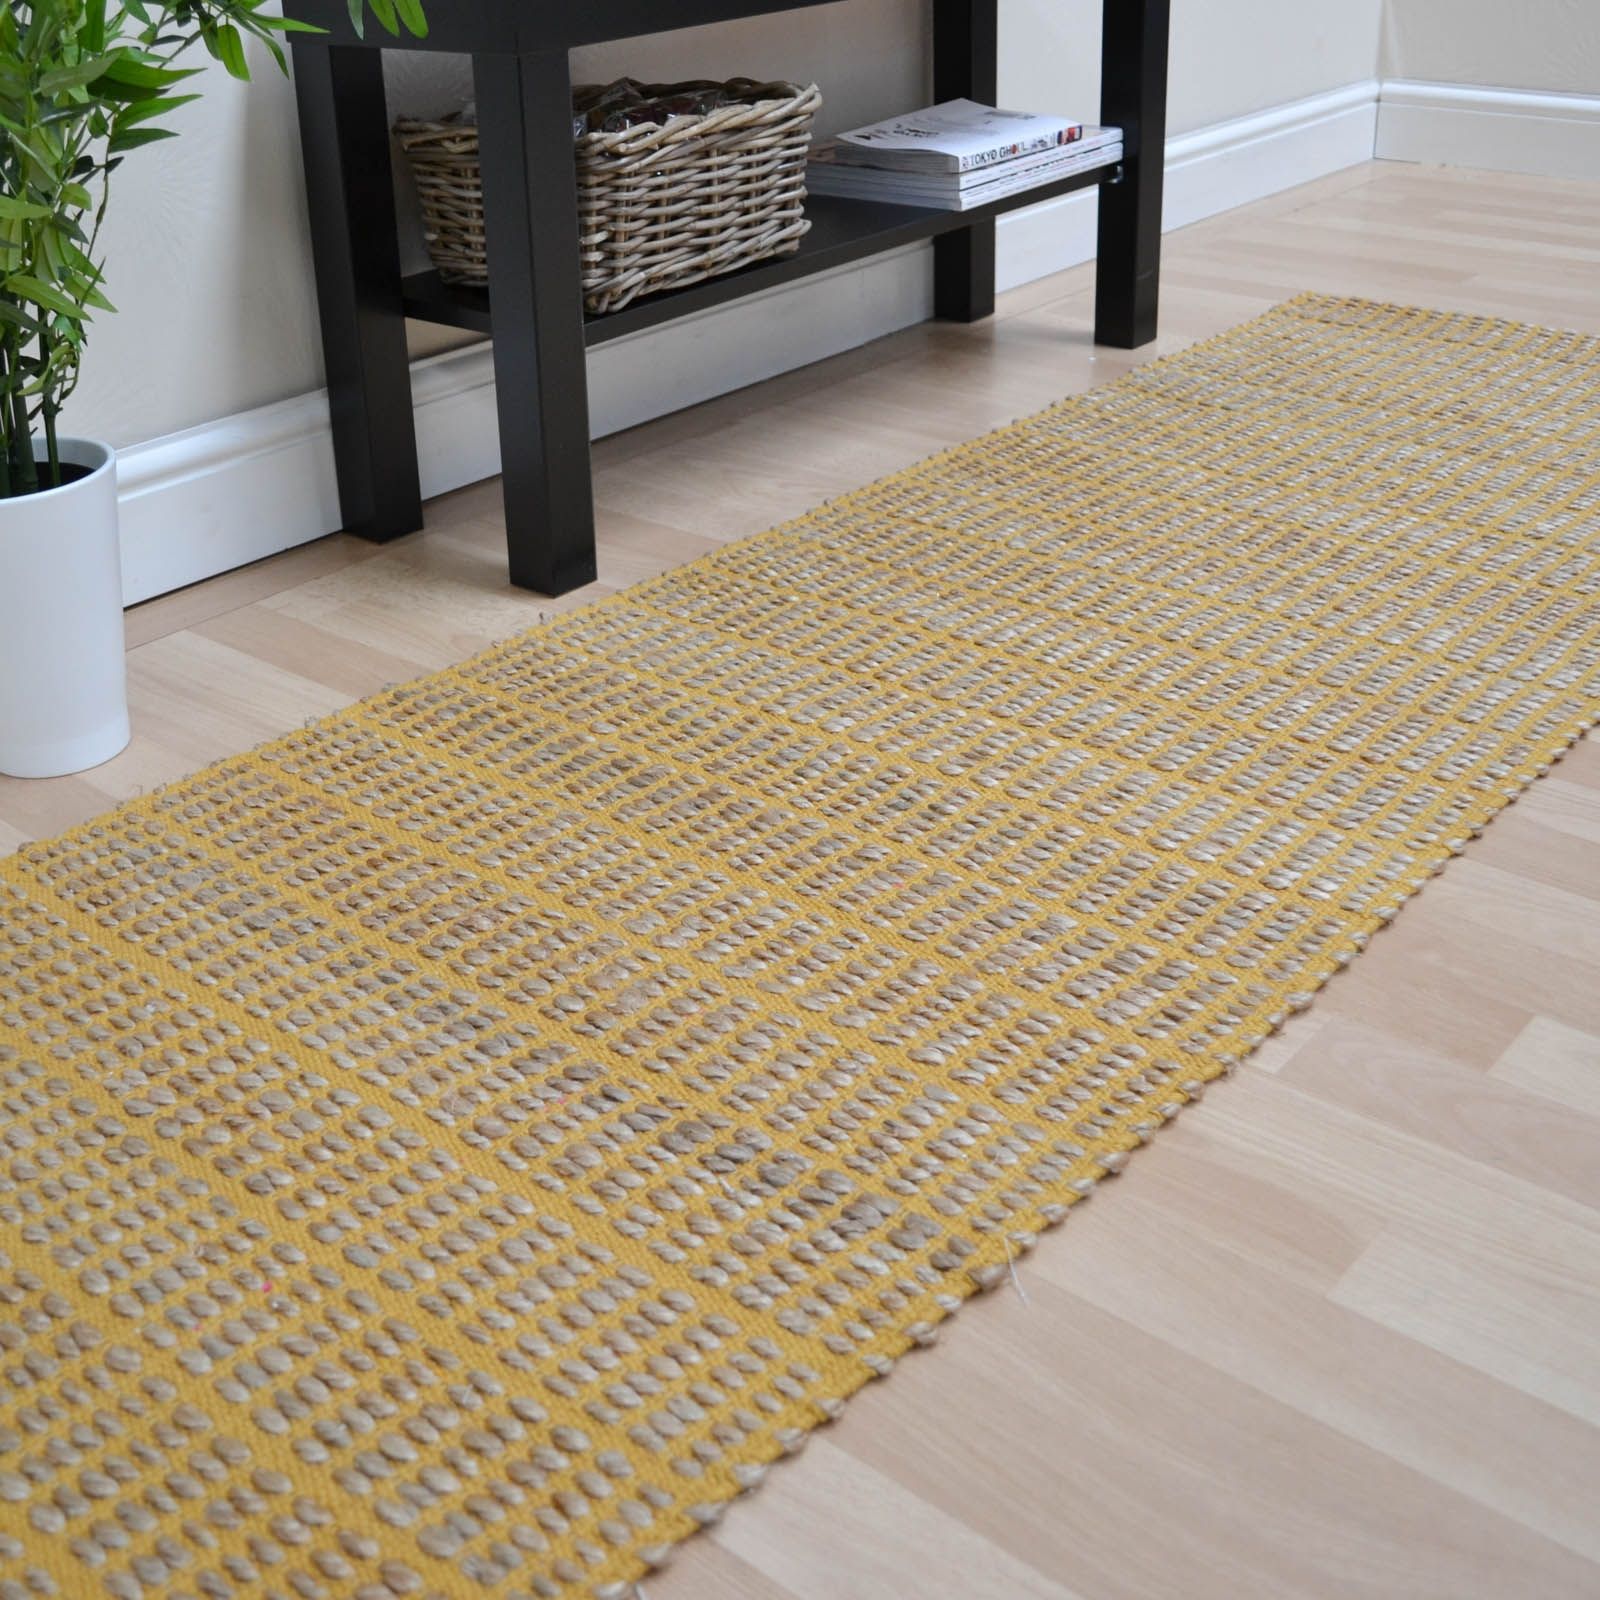 Hall Rugs Uk Roselawnlutheran With Hall Runners And Rugs (Photo 5 of 20)